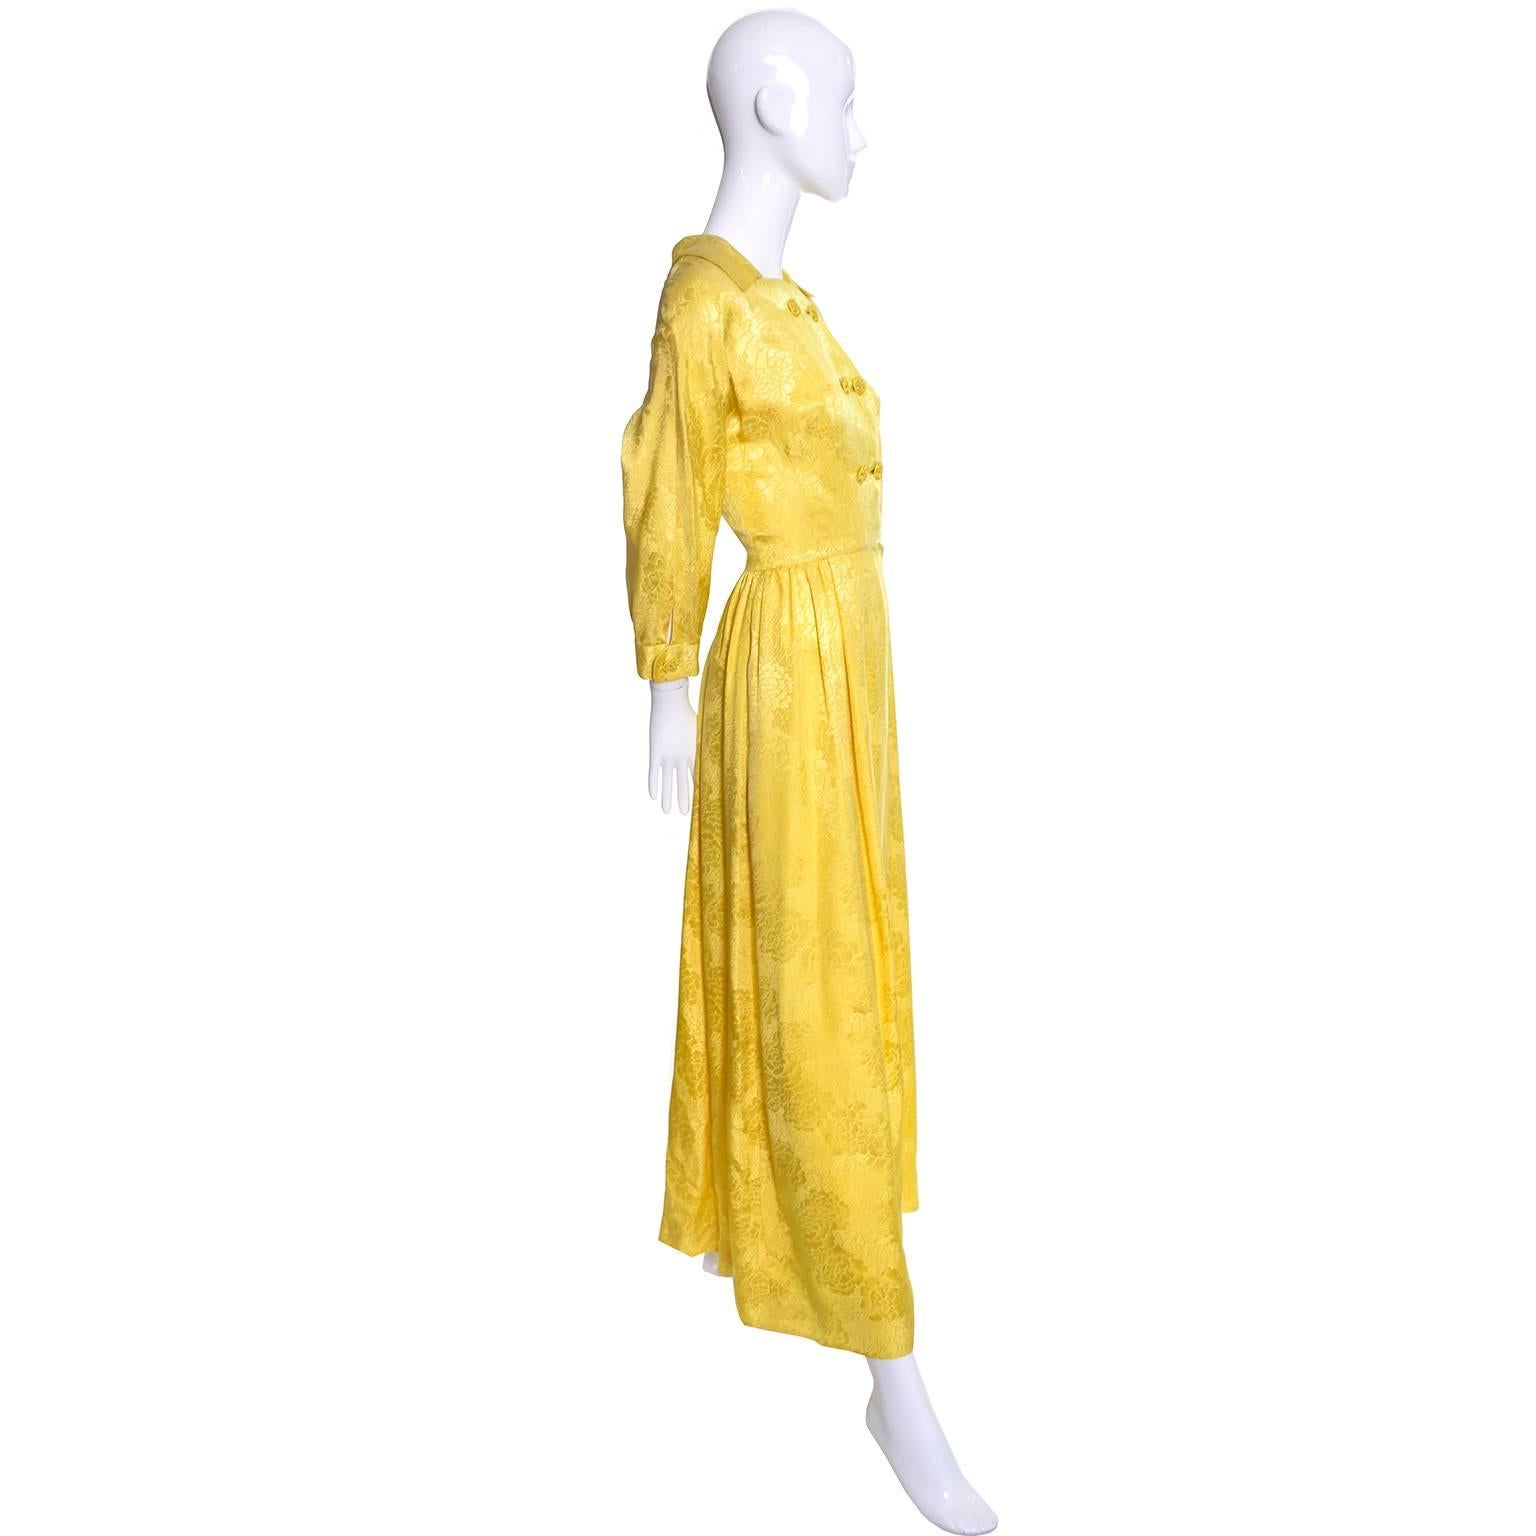 This is one of my favorite robes - a fine silk robe or hostess outfit made in the 1960's in Hong Kong by Dynasty.  Some of the most beautiful silk evening gowns and sleepwear from the 1960's were made by Dynasty.  This robe is made from a luxurious